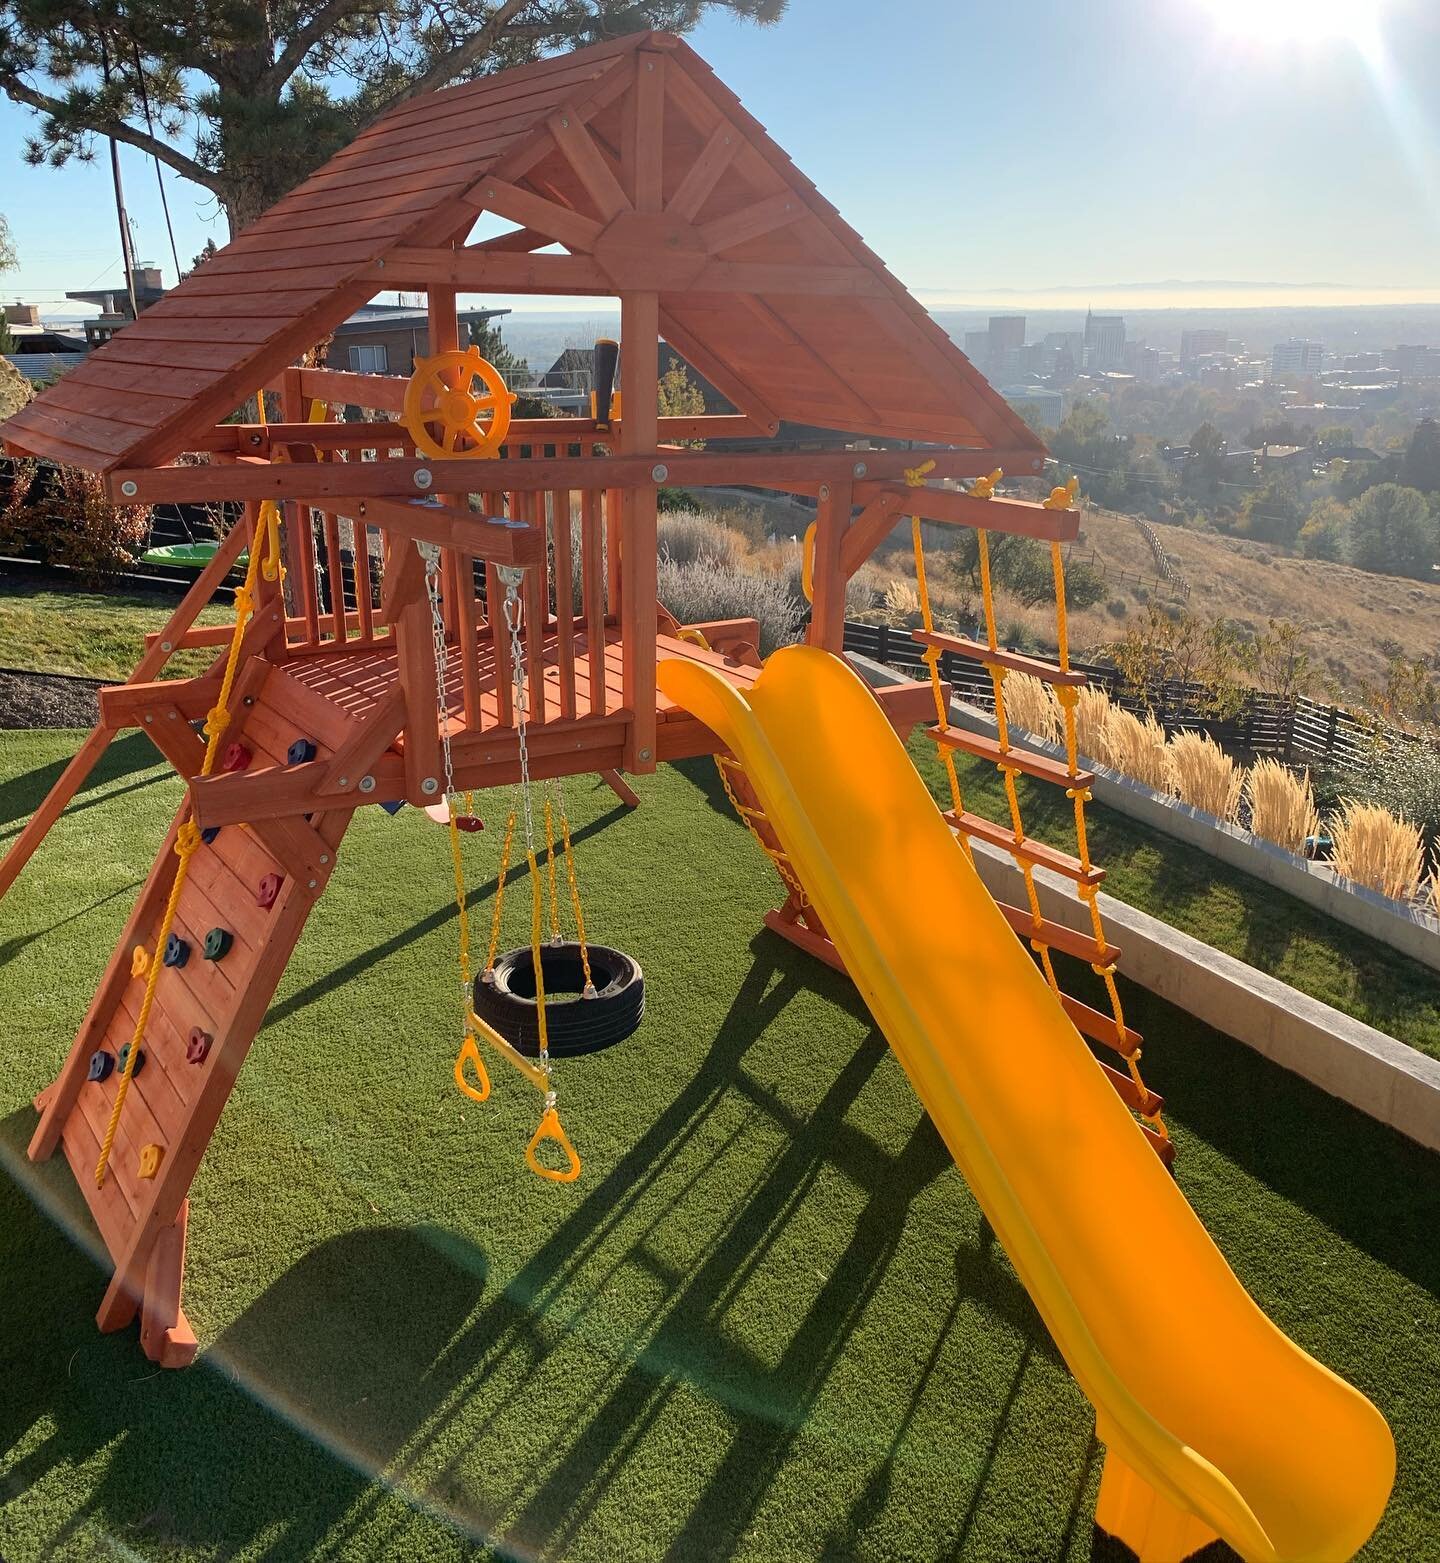 5.8 Jaguar Playcenter w/ Wood Roof
⠀
Imagination can really take flight with a view like this one 🙌🏼🌇
&mdash;&mdash;&mdash;&mdash;&mdash;&mdash;&mdash;&mdash;&mdash;&mdash;&mdash;&mdash;&mdash;
#intermountainplayground #swingsets #playgrounds #pla